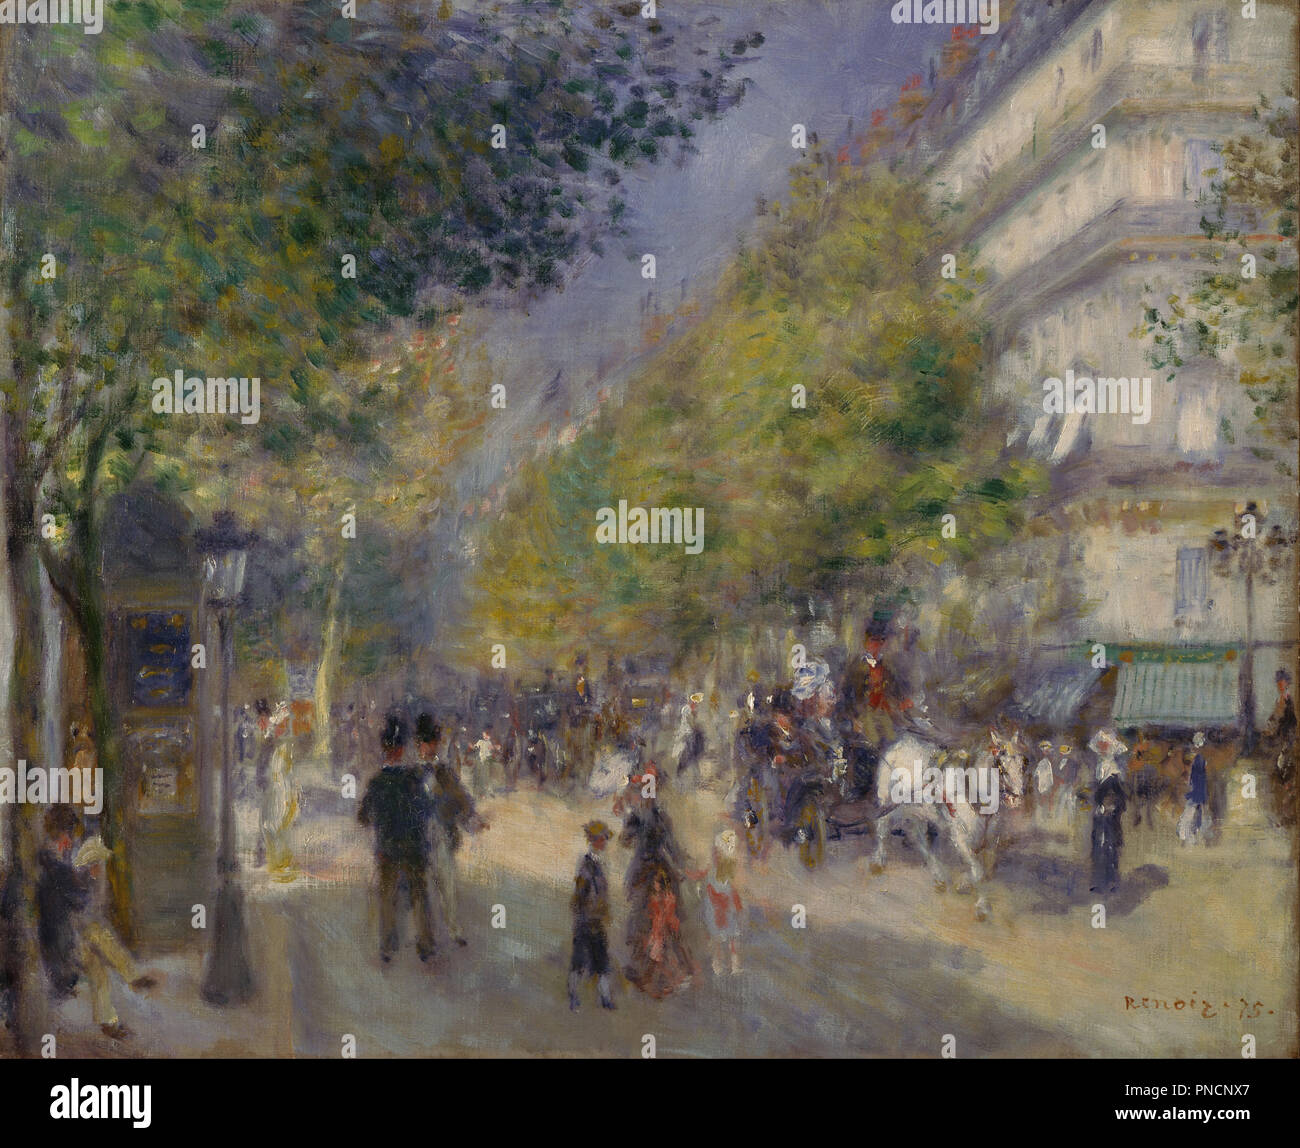 The Grands Boulevards. Date/Period: 1875. Painting. Oil on canvas Oil on canvas. Height: 521.21 mm (20.52 in); Width: 635.51 mm (25.02 in). Author: Renoir, Pierre-Auguste. AUGUSTE RENOIR. Stock Photo